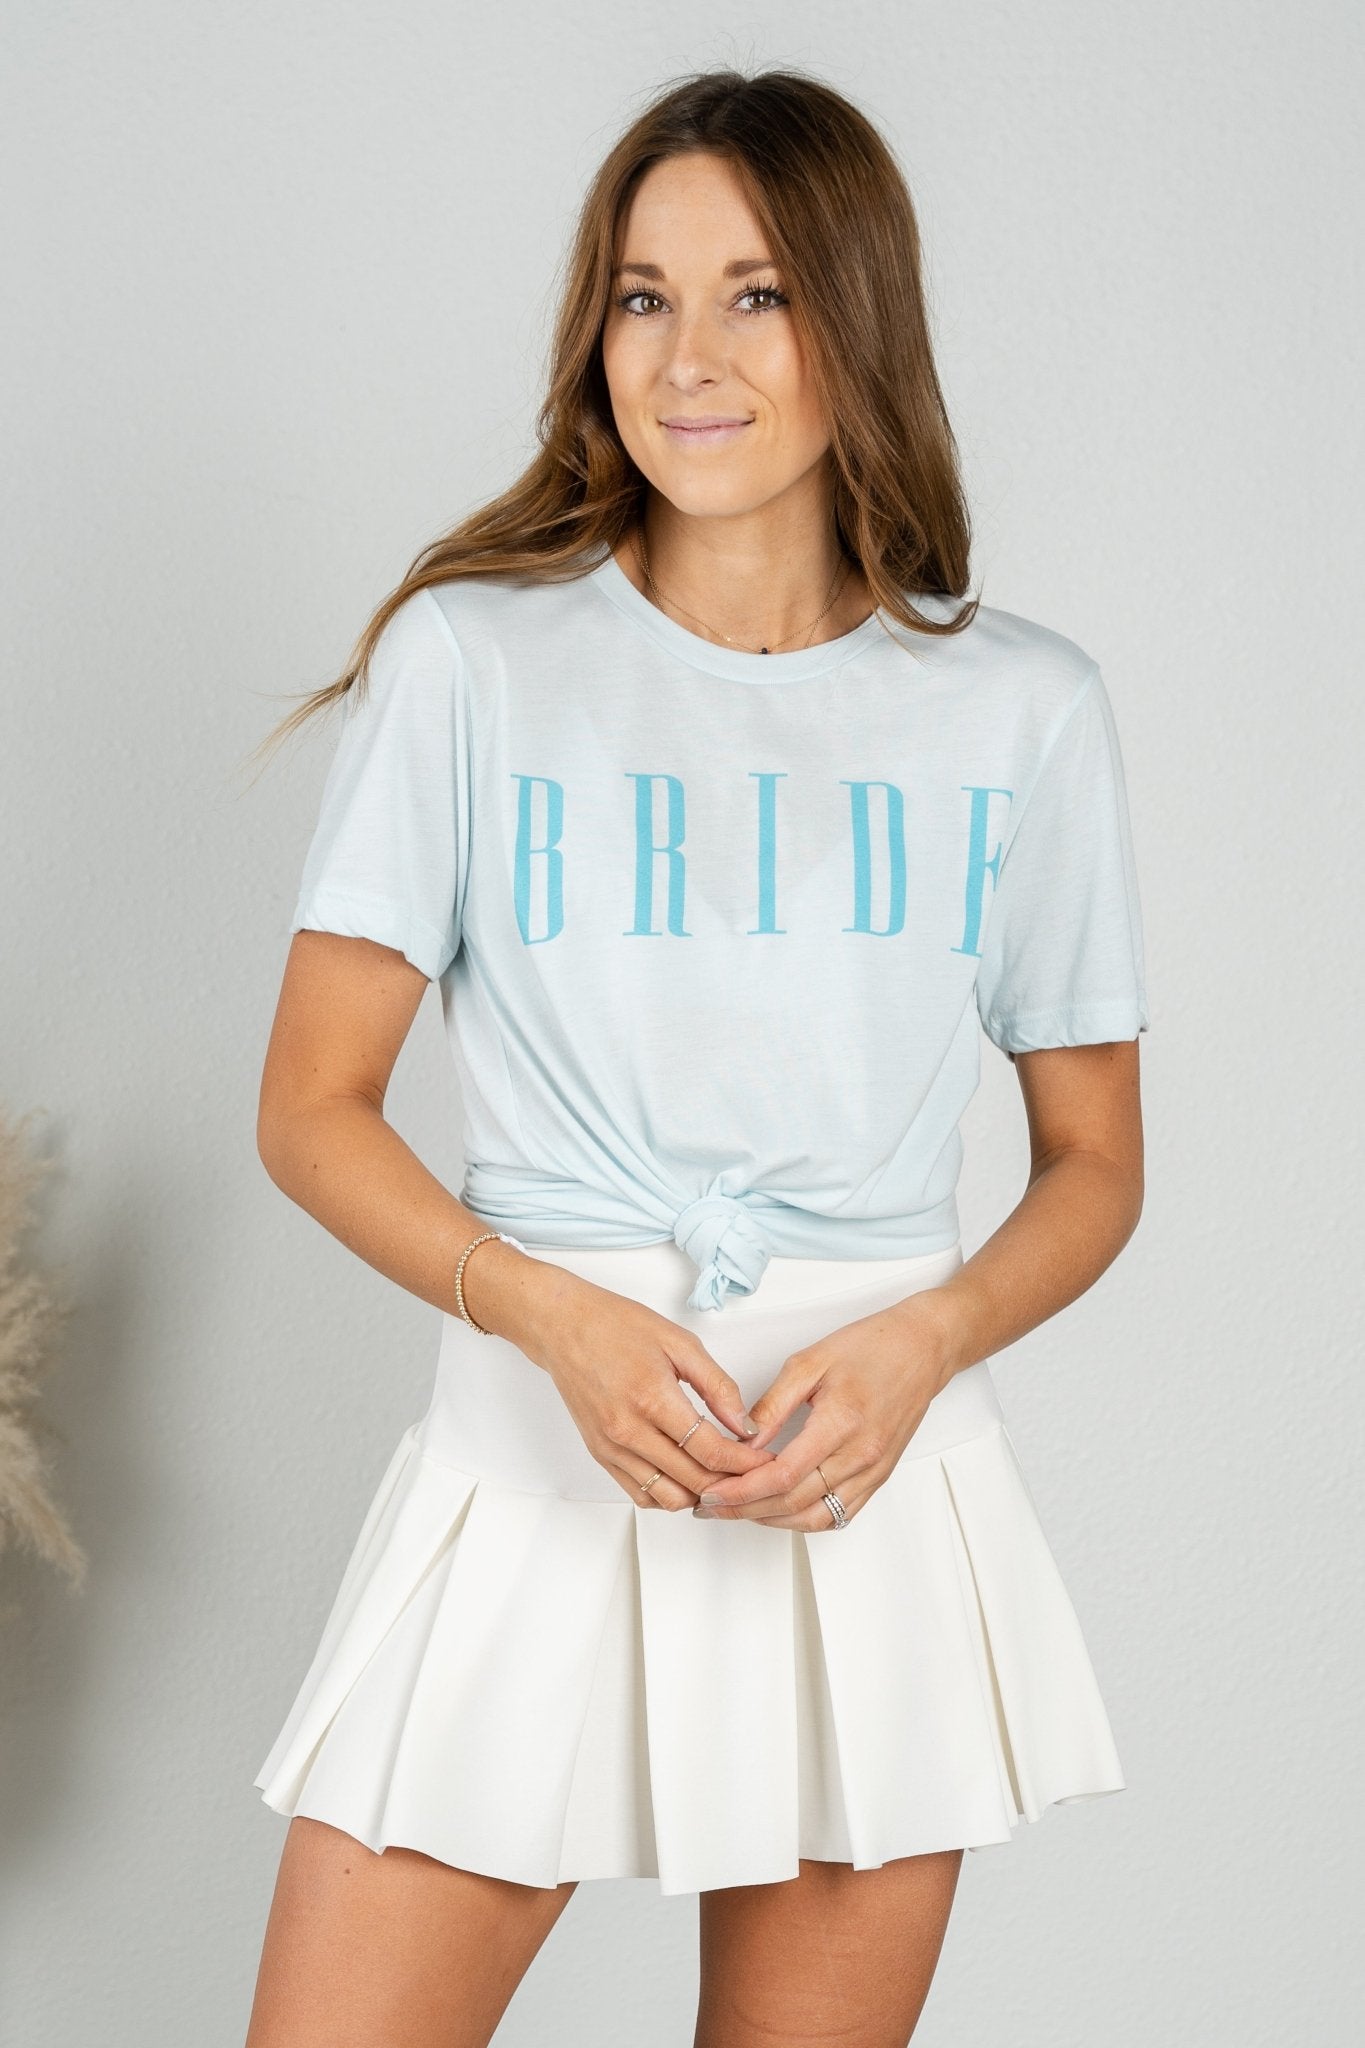 Bride trendy font short sleeve t-shirt ice blue - Affordable t-shirt - Boutique Graphic T-Shirts at Lush Fashion Lounge Boutique in Oklahoma City